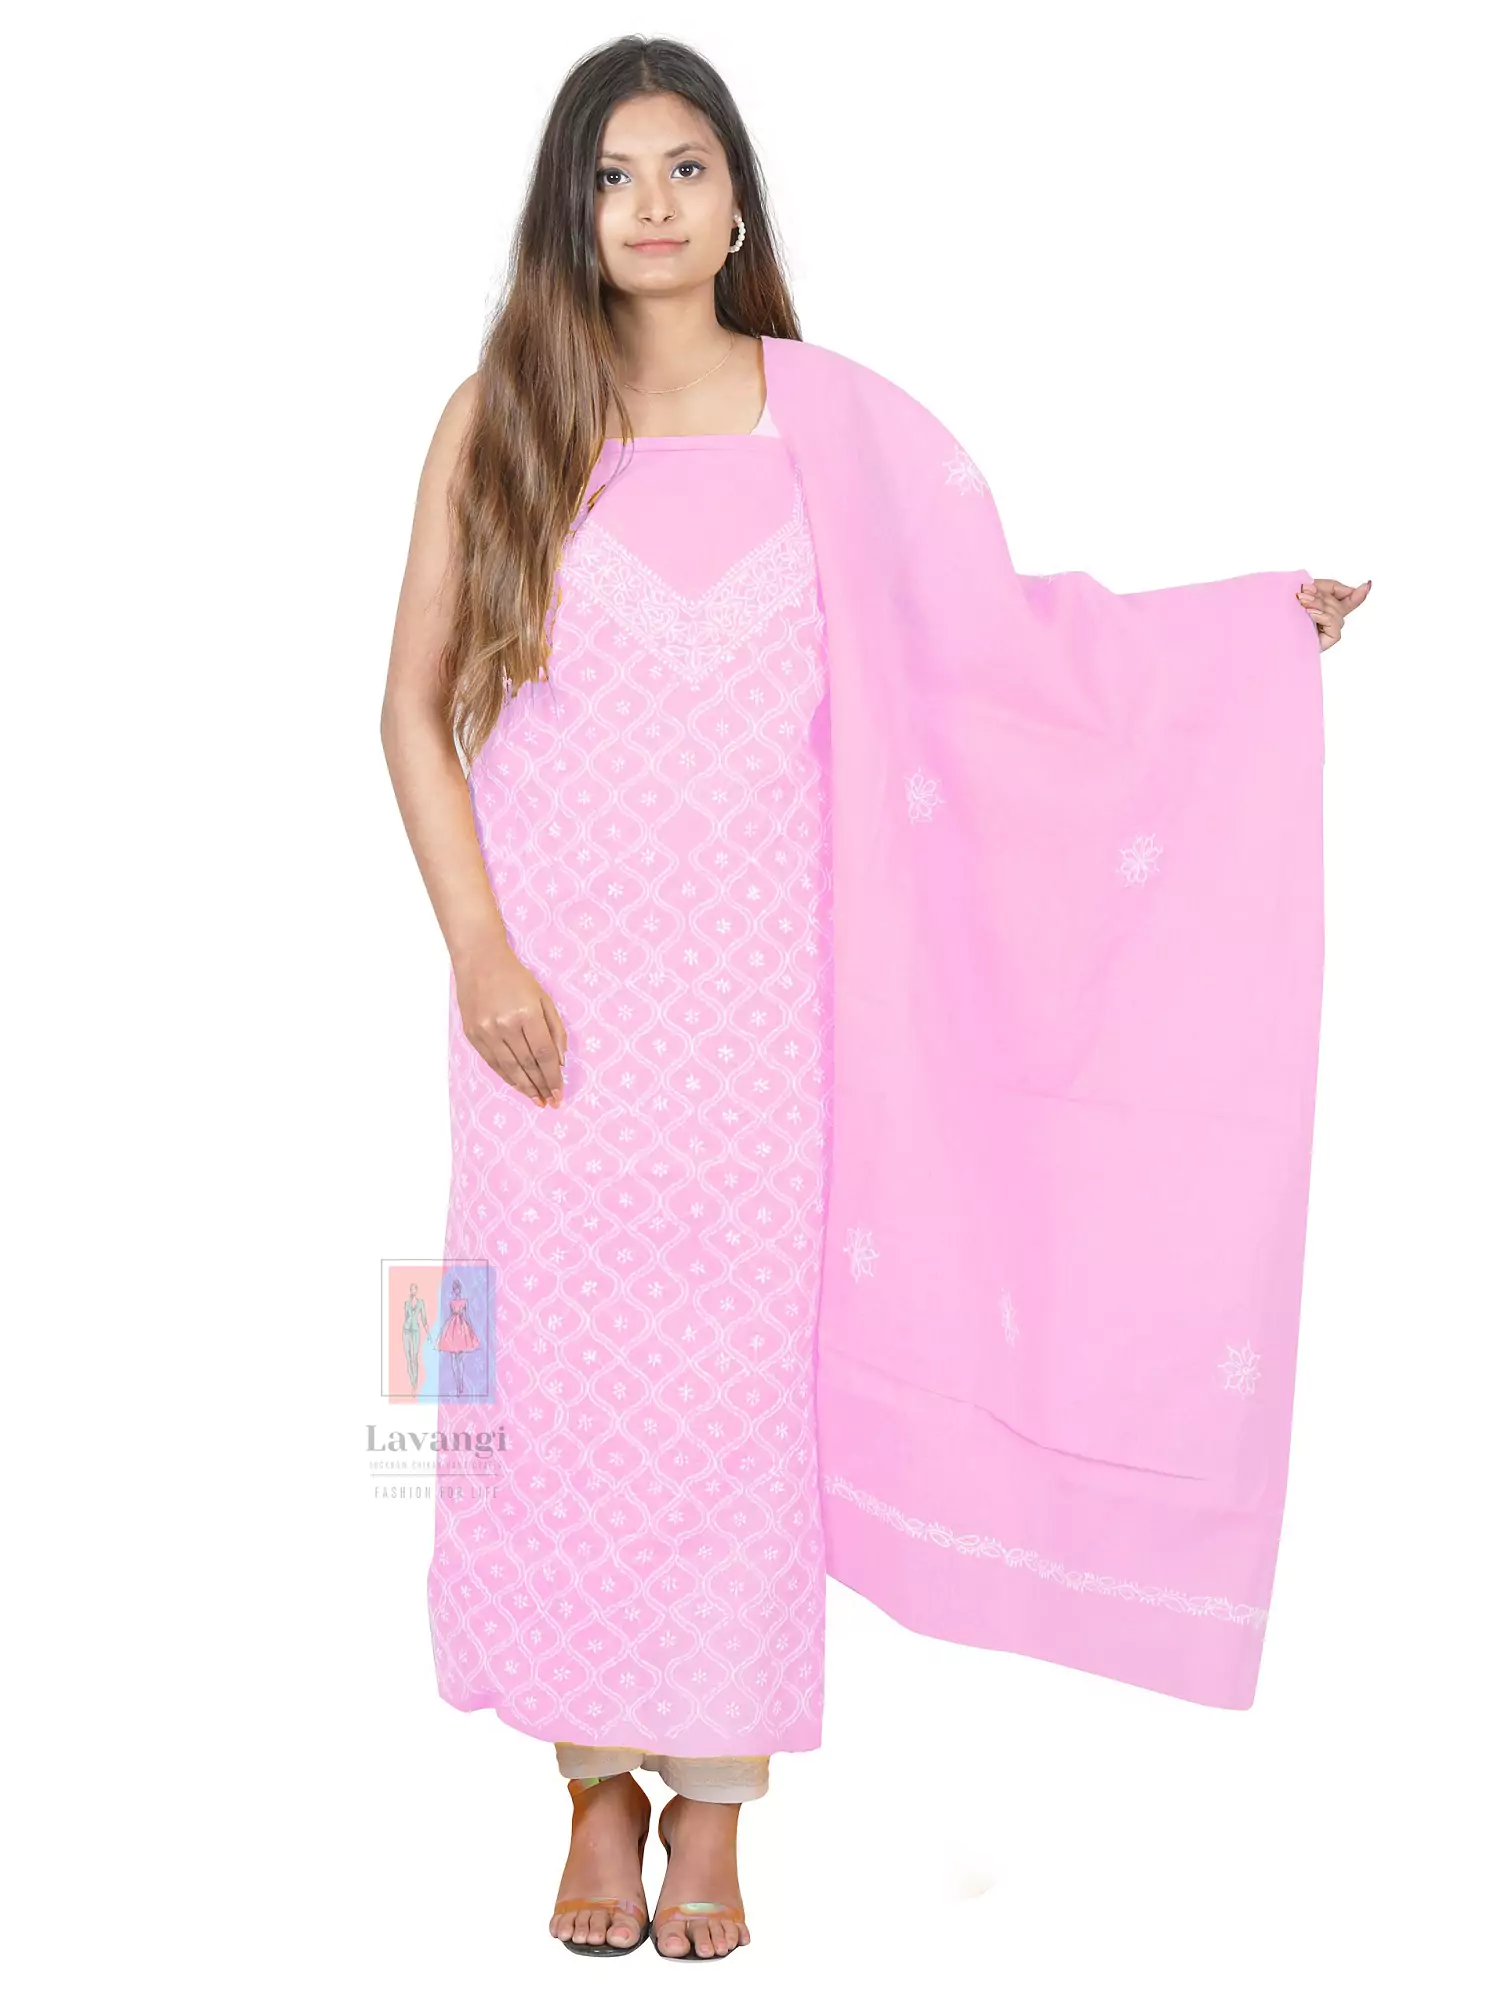 Lavangi Lucknow Chikan Baby Pink Colour Anda Jaal Unstitched Cotton Dress Material